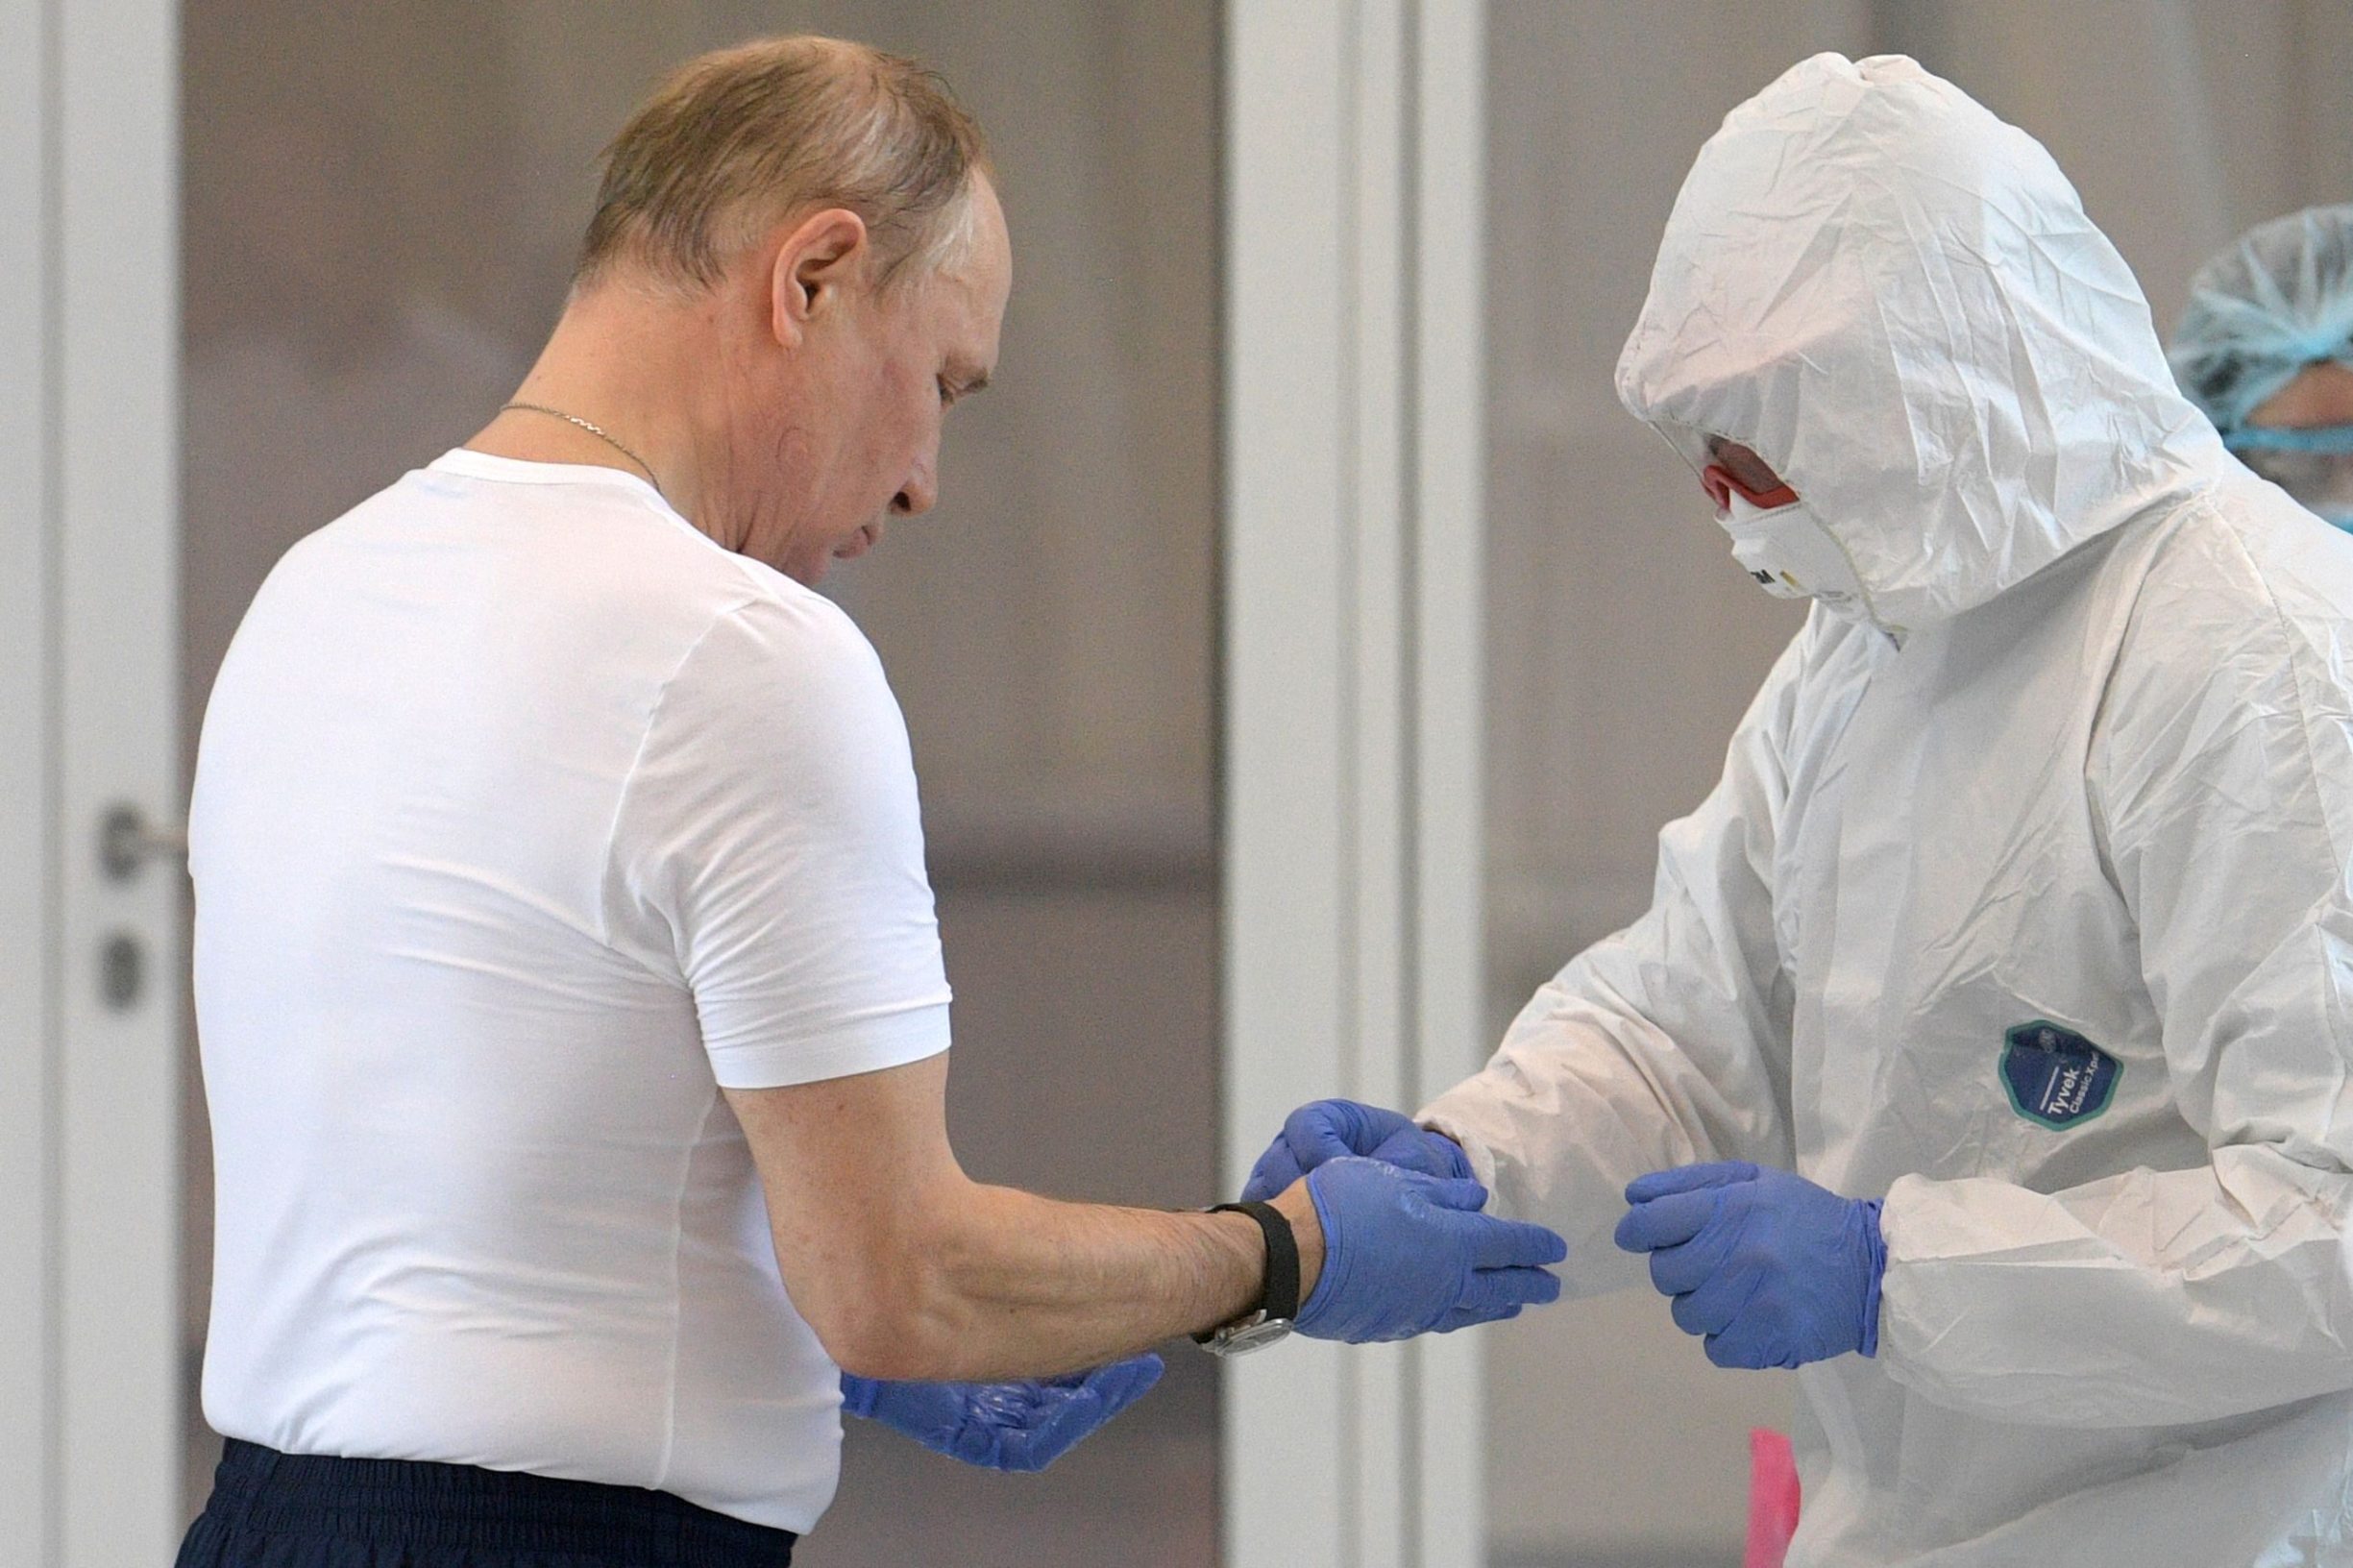 Russian President Vladimir Putin visits a hospital where patients infected with the COVID-19 novel coronavirus are being treated in the settlement of Kommunarka in Moscow on March 24, 2020. (Photo by Alexey DRUZHININ / SPUTNIK / AFP)